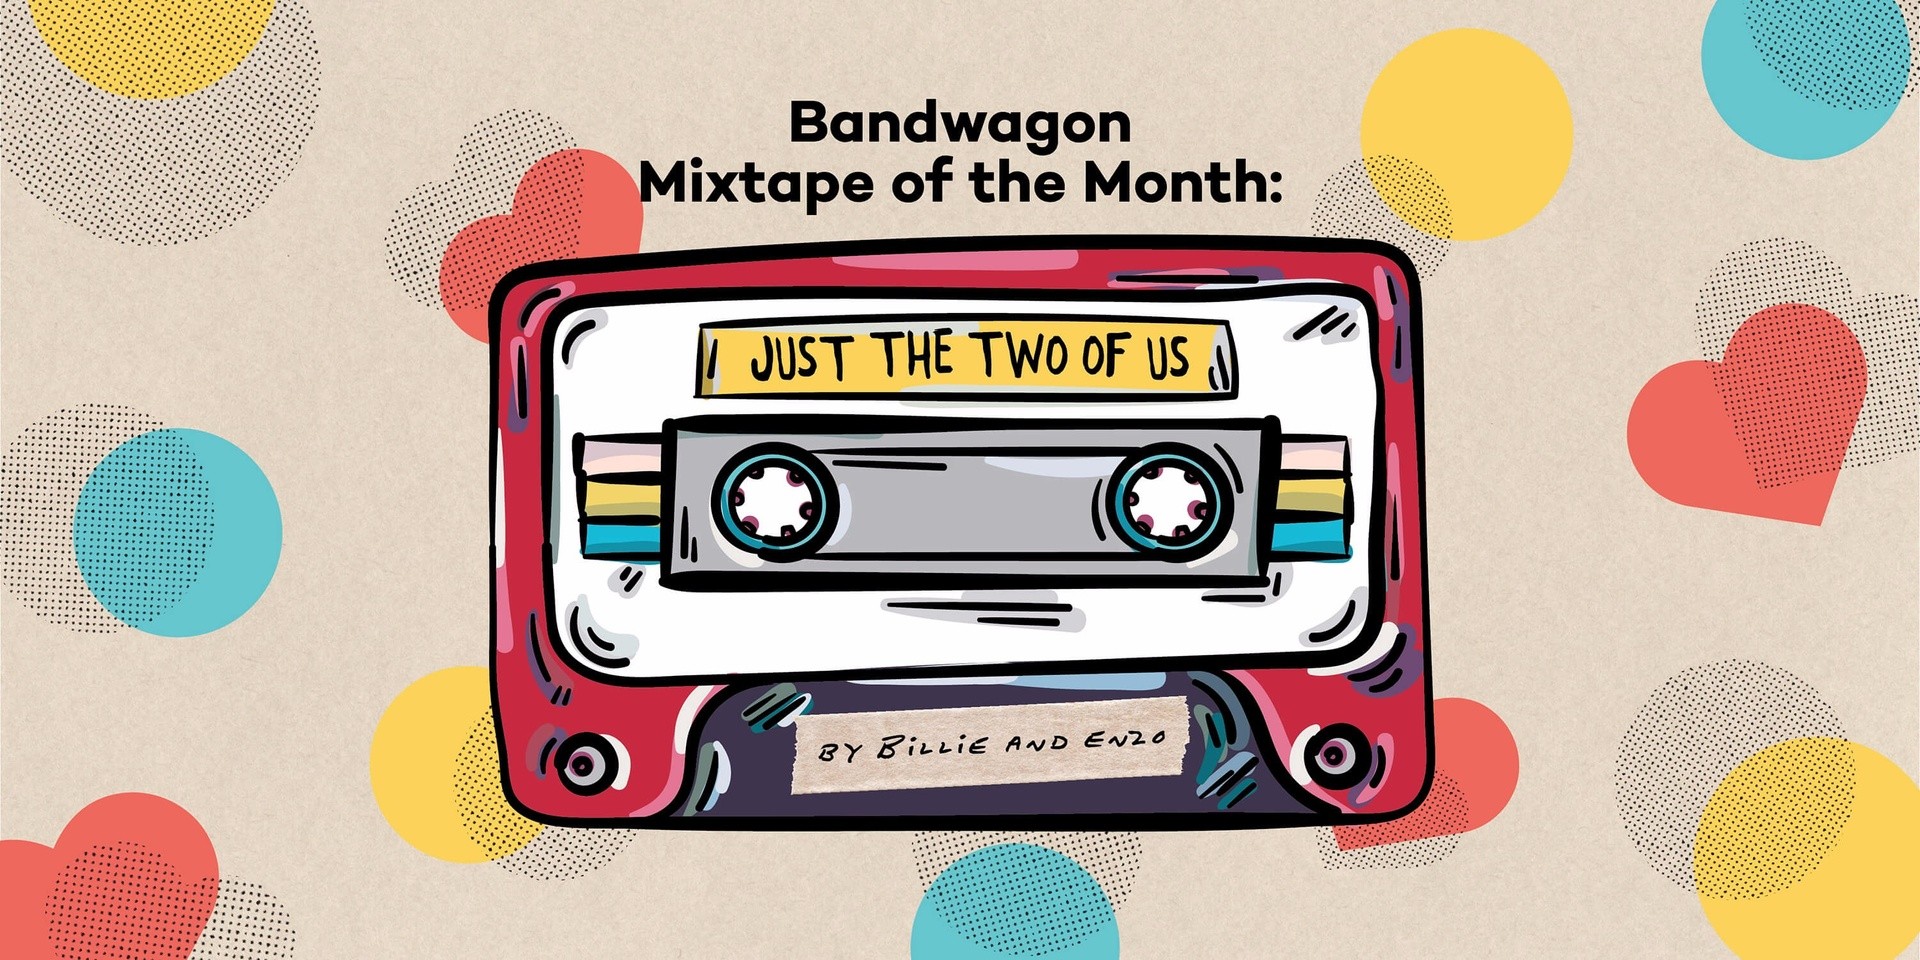 Bandwagon Mixtape of the Month #2: Just the Two of Us by Billie and Enzo